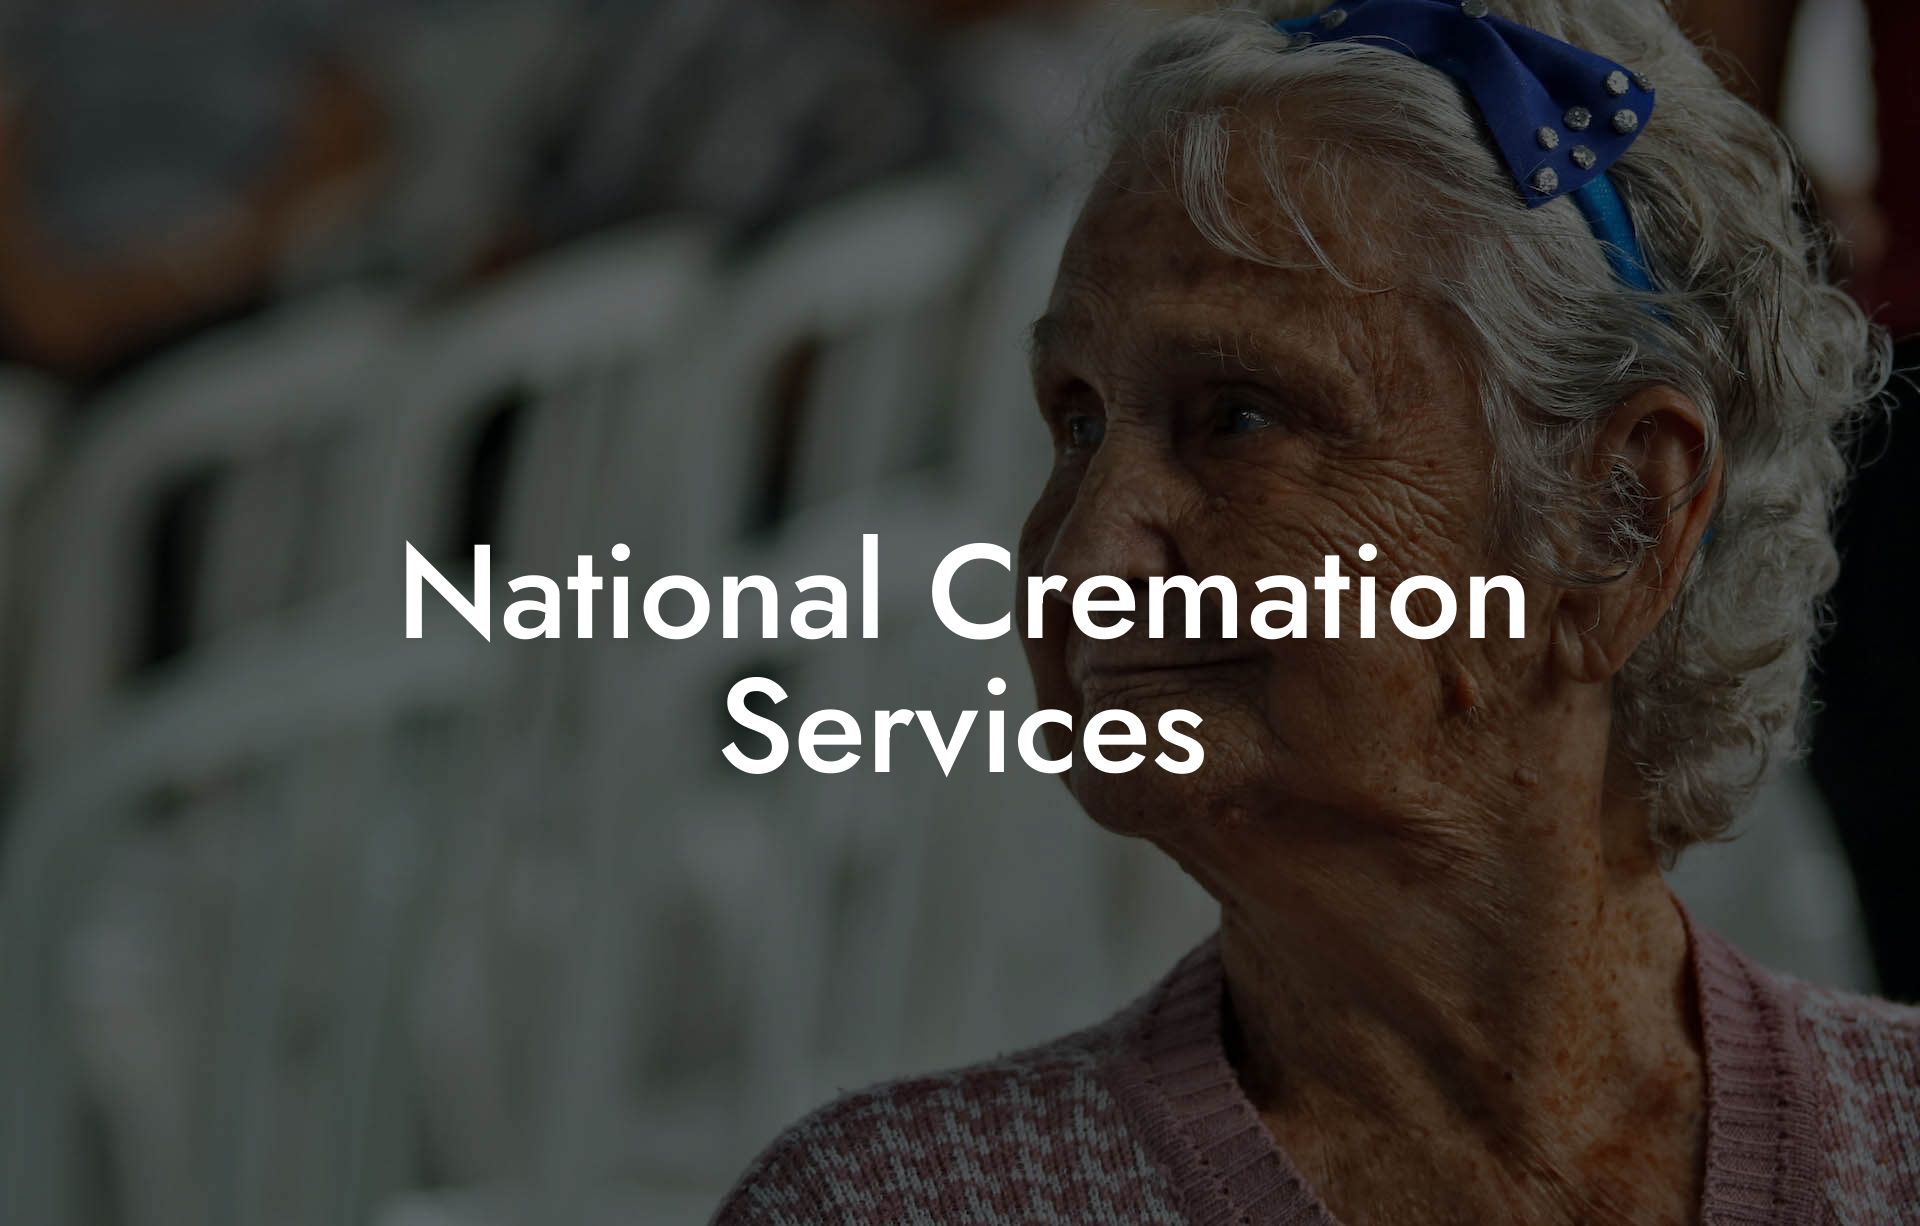 National Cremation Services